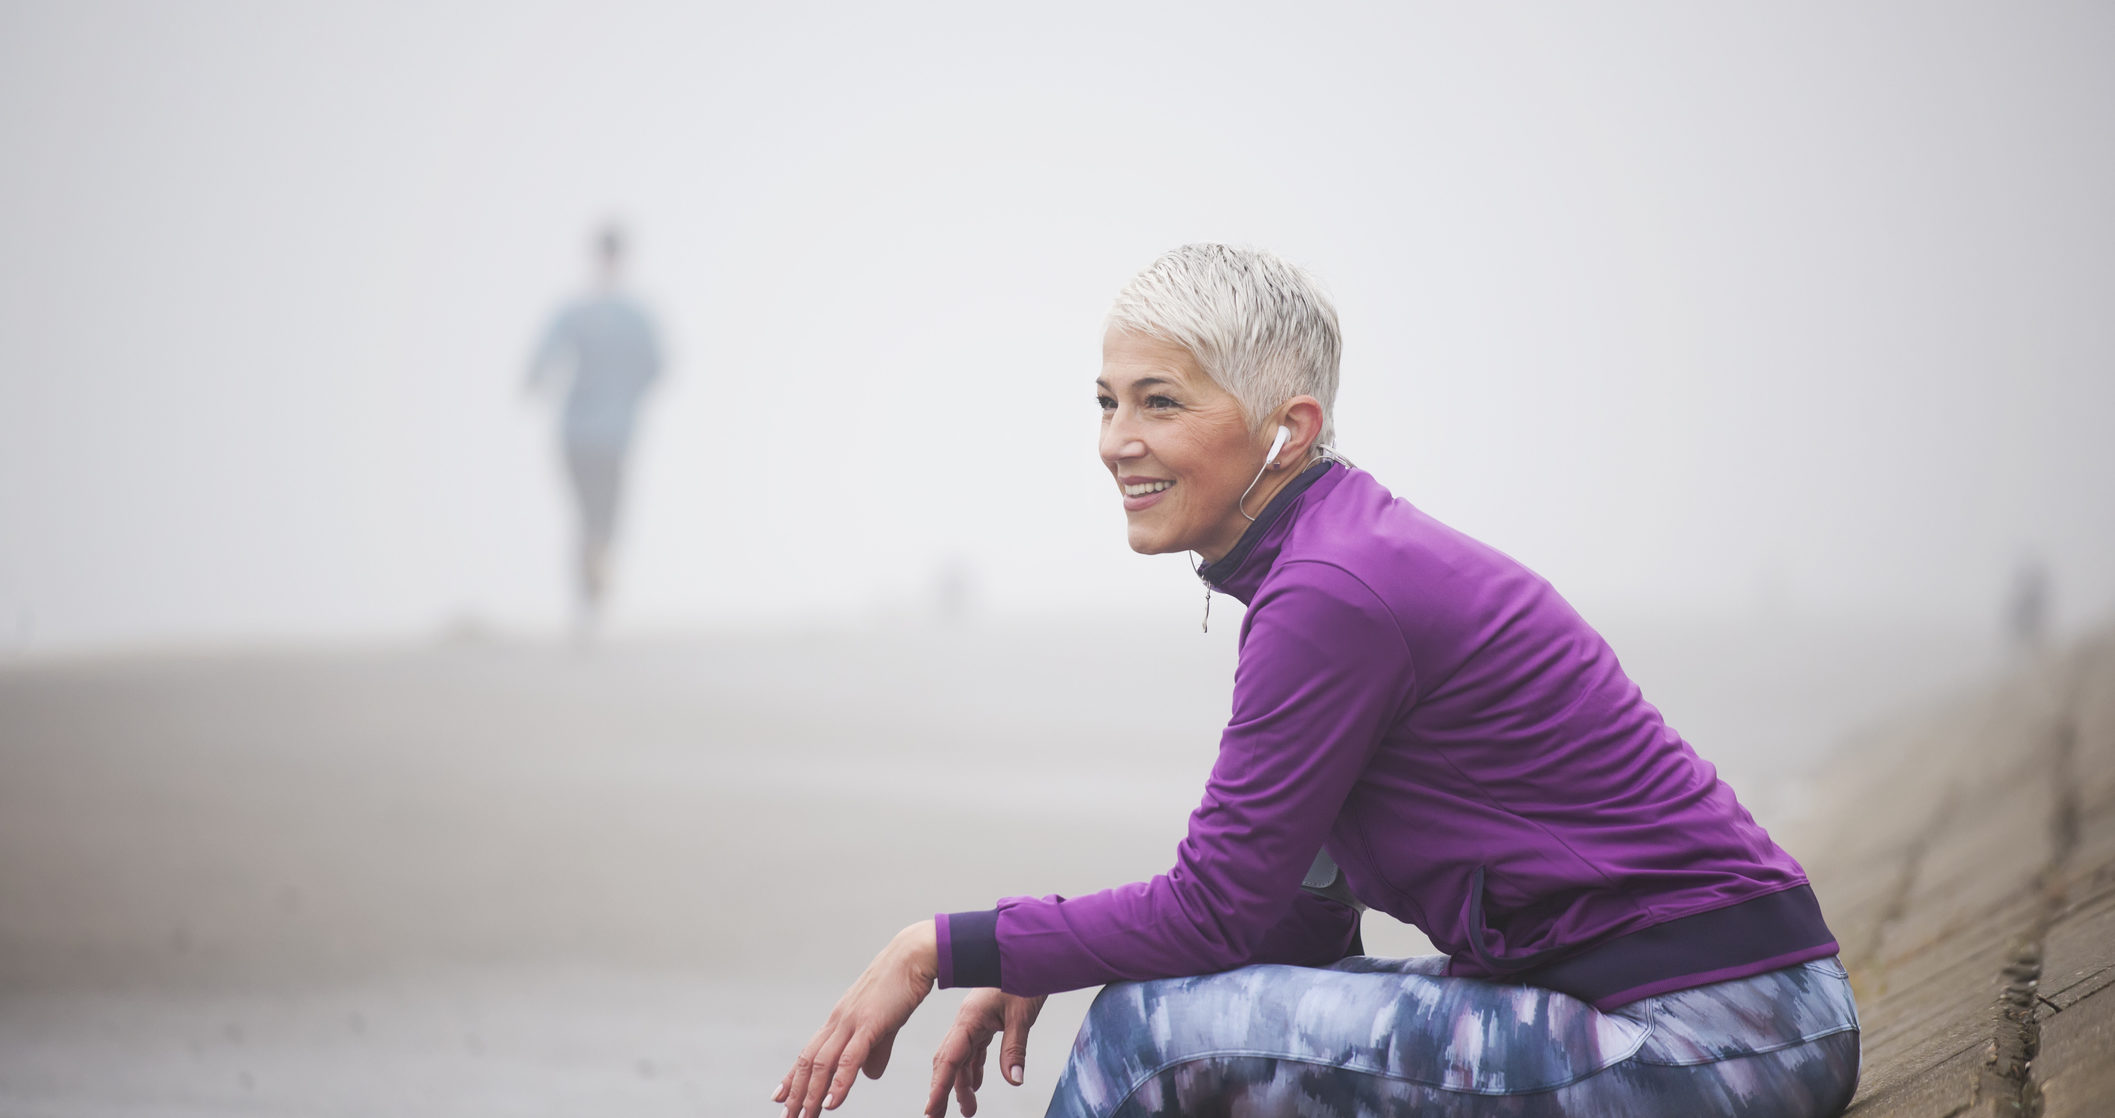 Beautiful mature woman jogging through fog in early autumn day